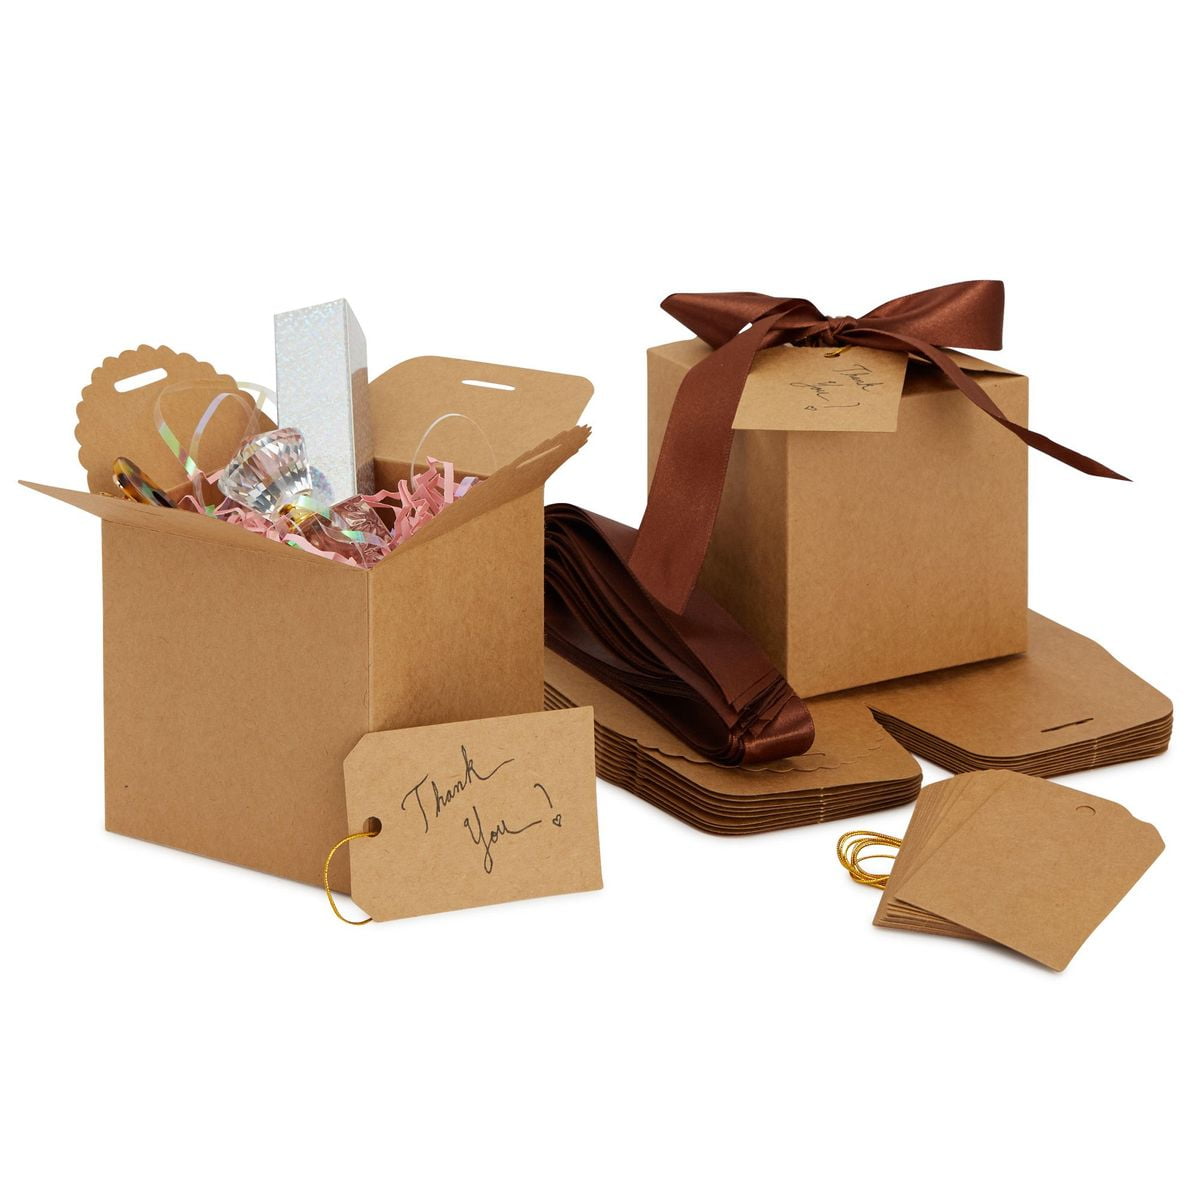 15 Paper Gift Box 4x4x4 One Piece Recycled Kraft Brown Boxes Mug Treats Favors 